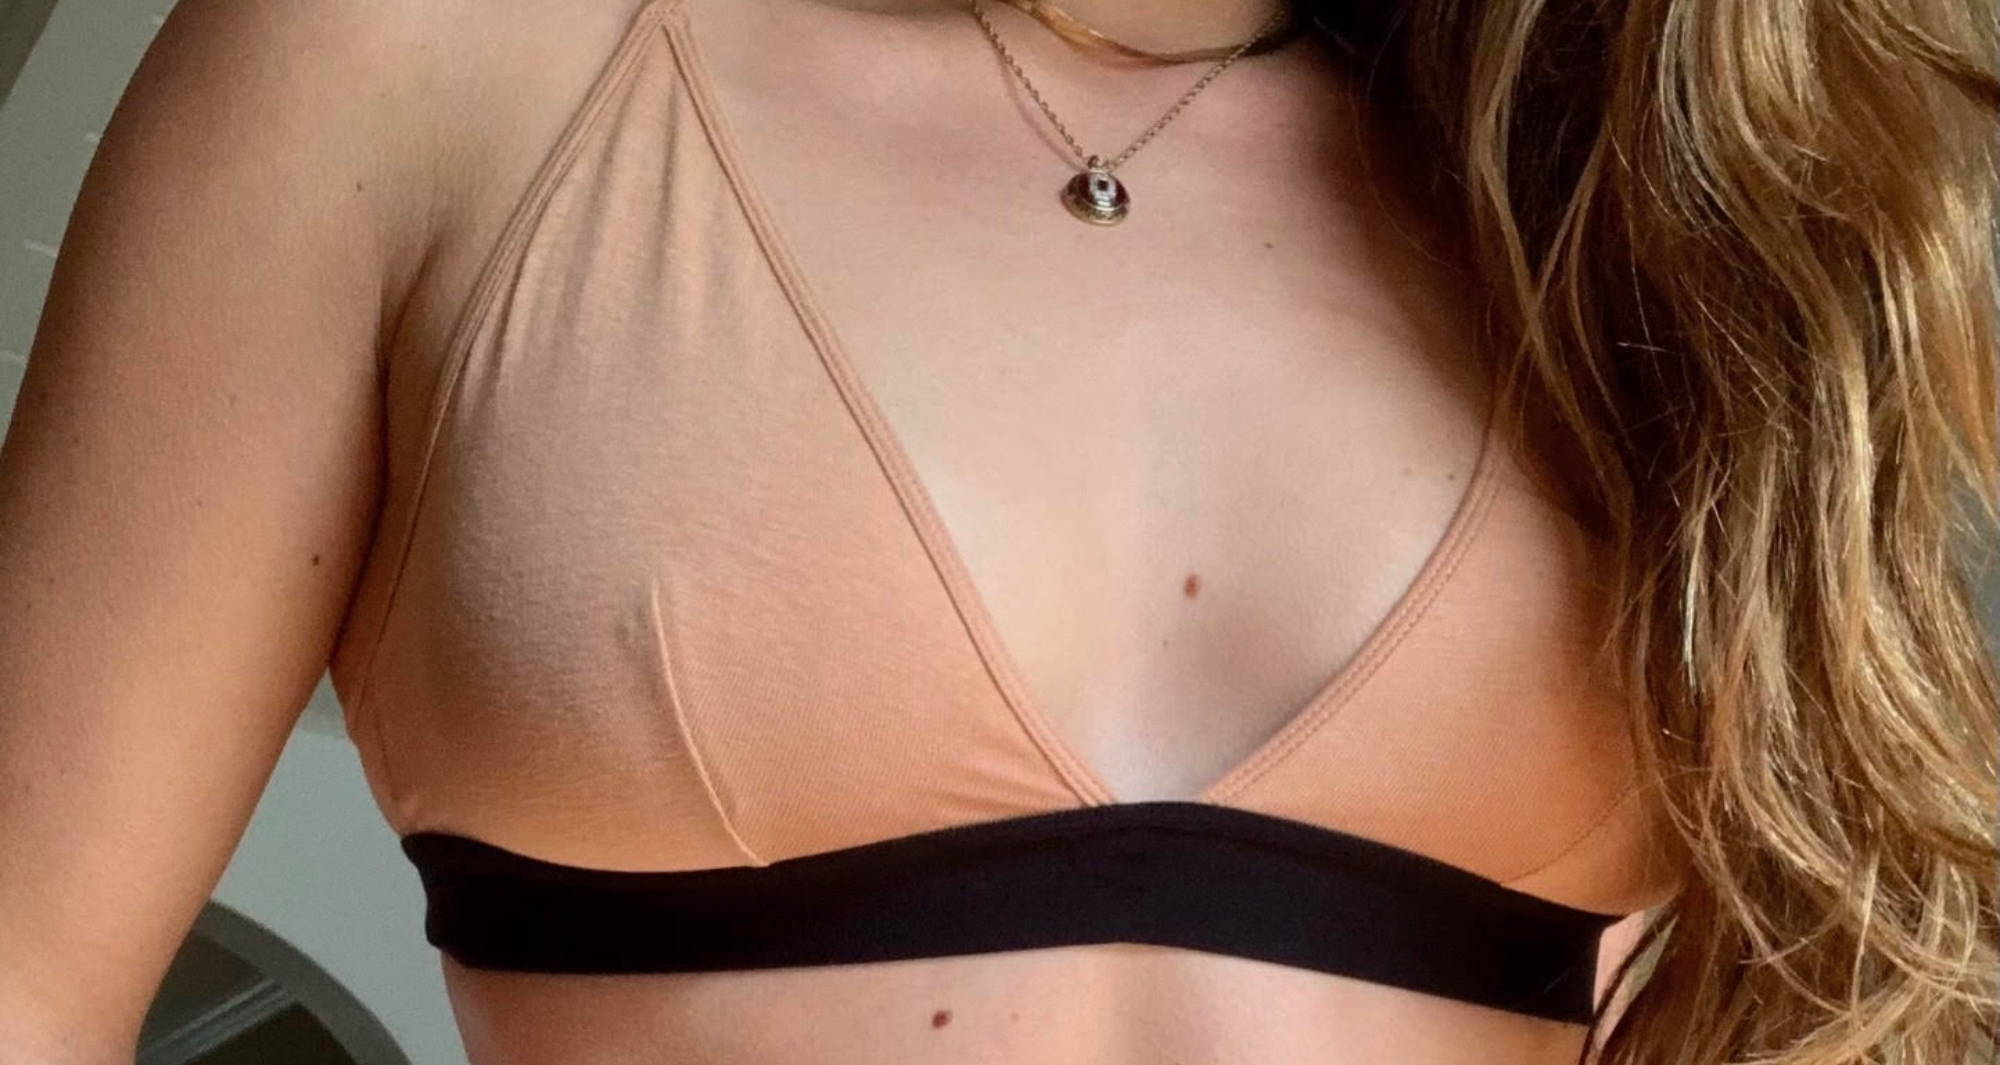 woman’s chest wearing a nude color triangle bralette with her hair over one shoulder wearing a gold necklace